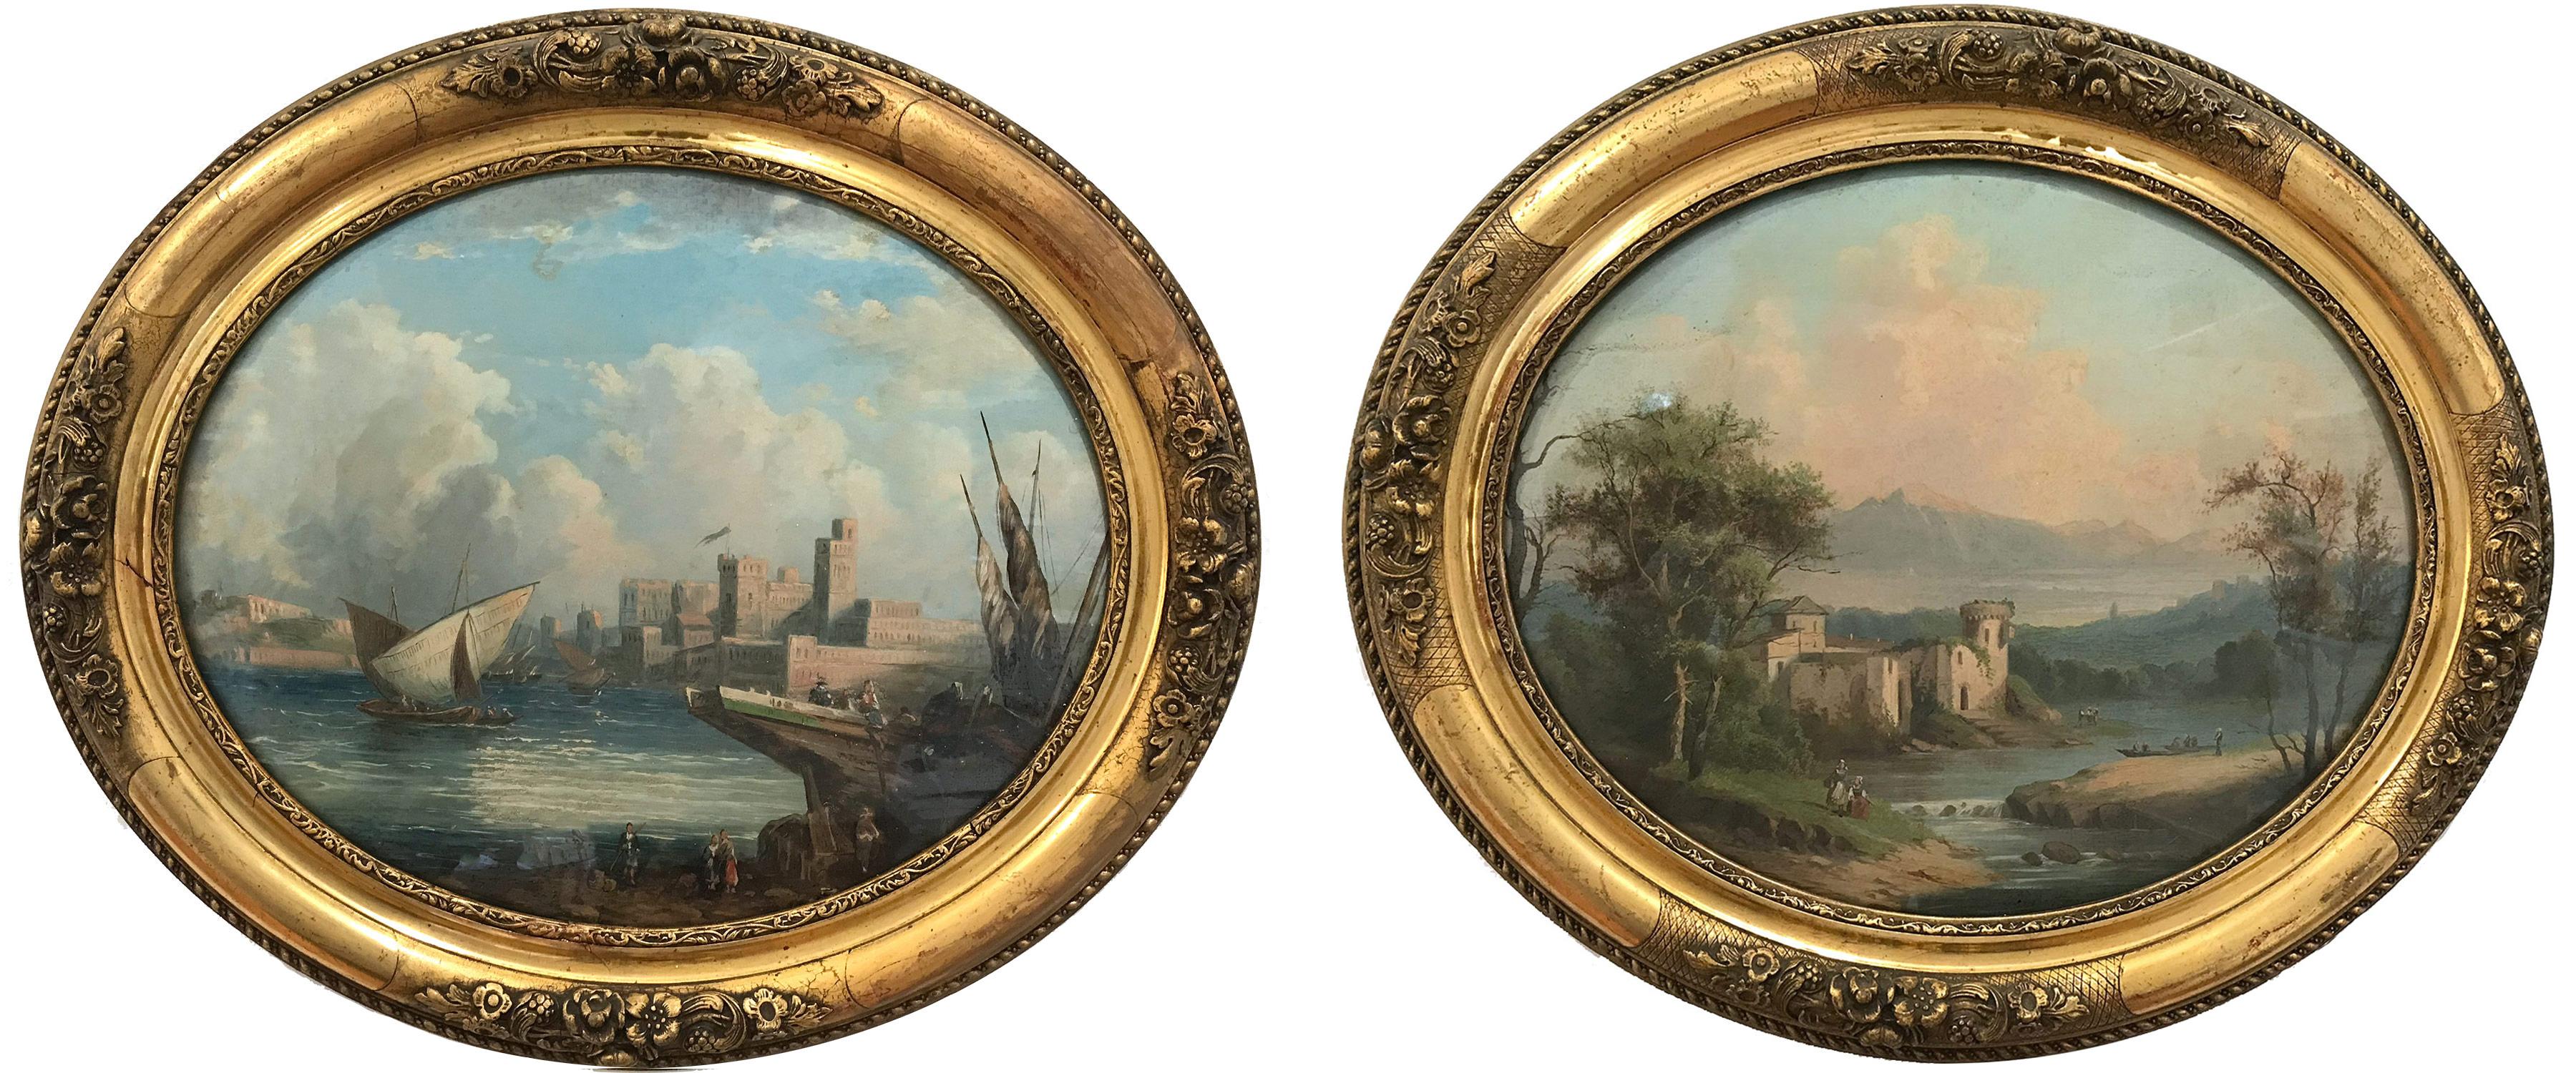 Pair of Ovals 19th Century Continental School Landscape and Seascape Paintings